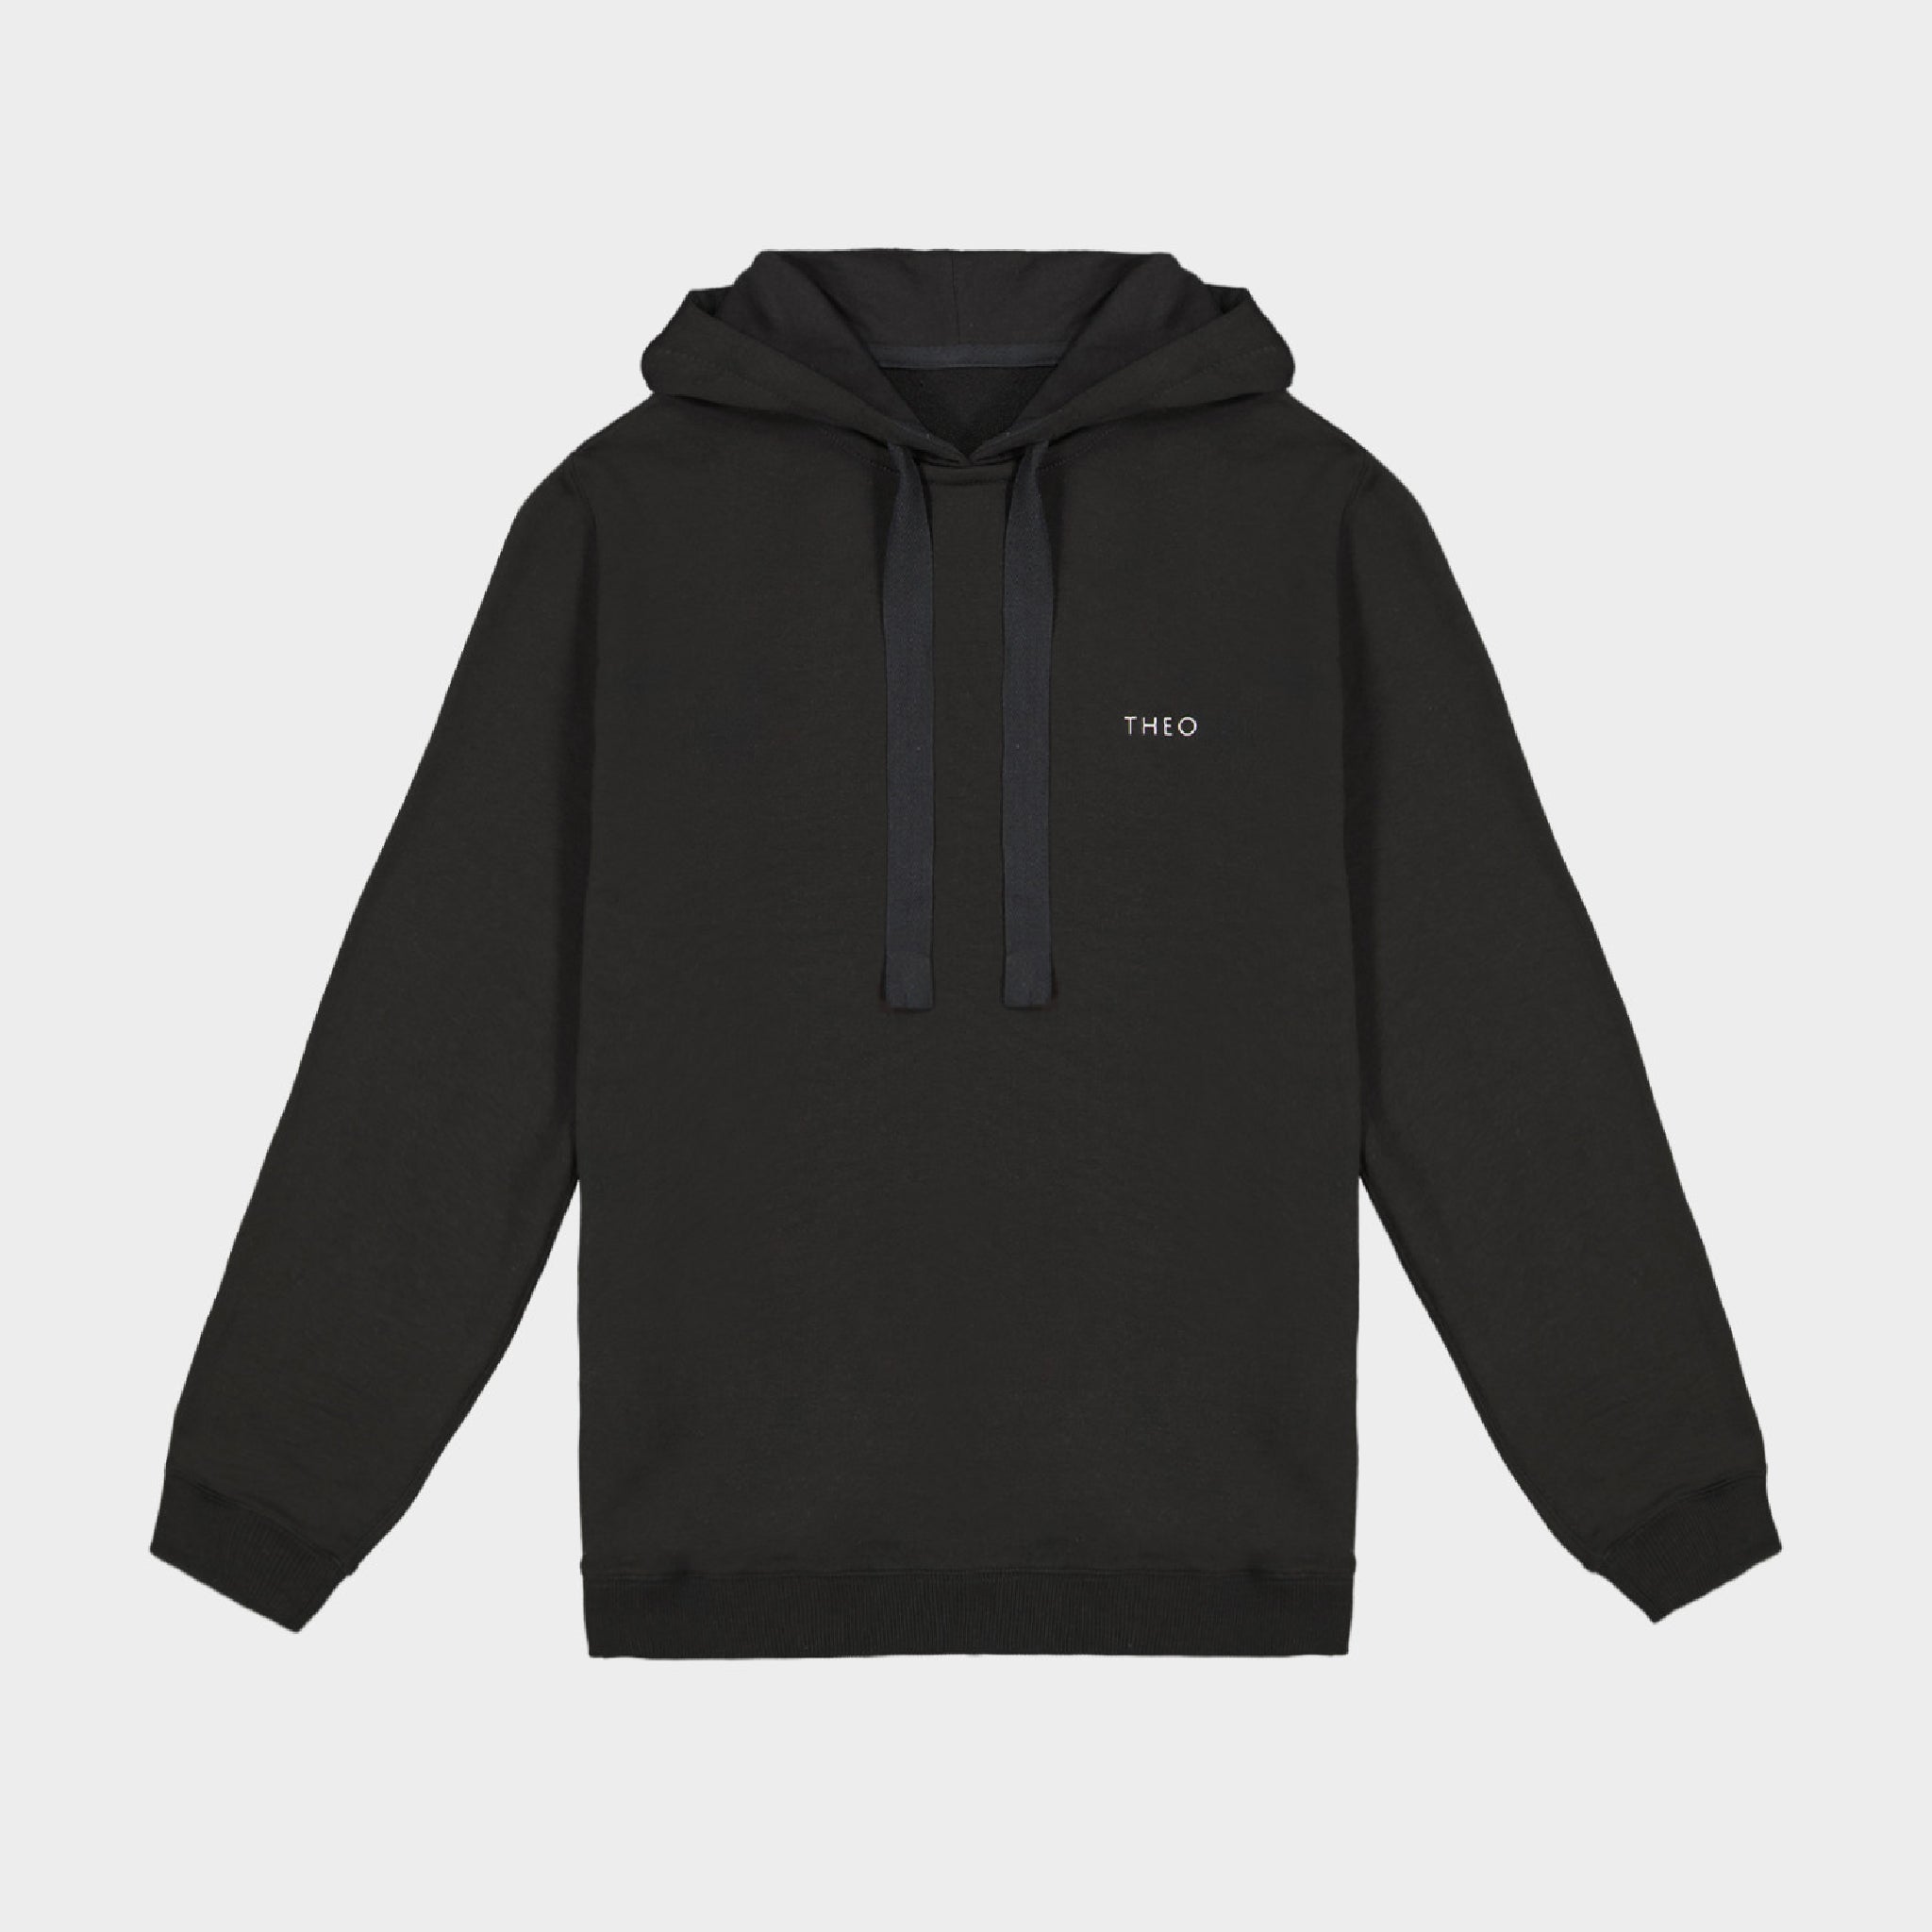 BLACK HOODIE WITH THEO LOGO